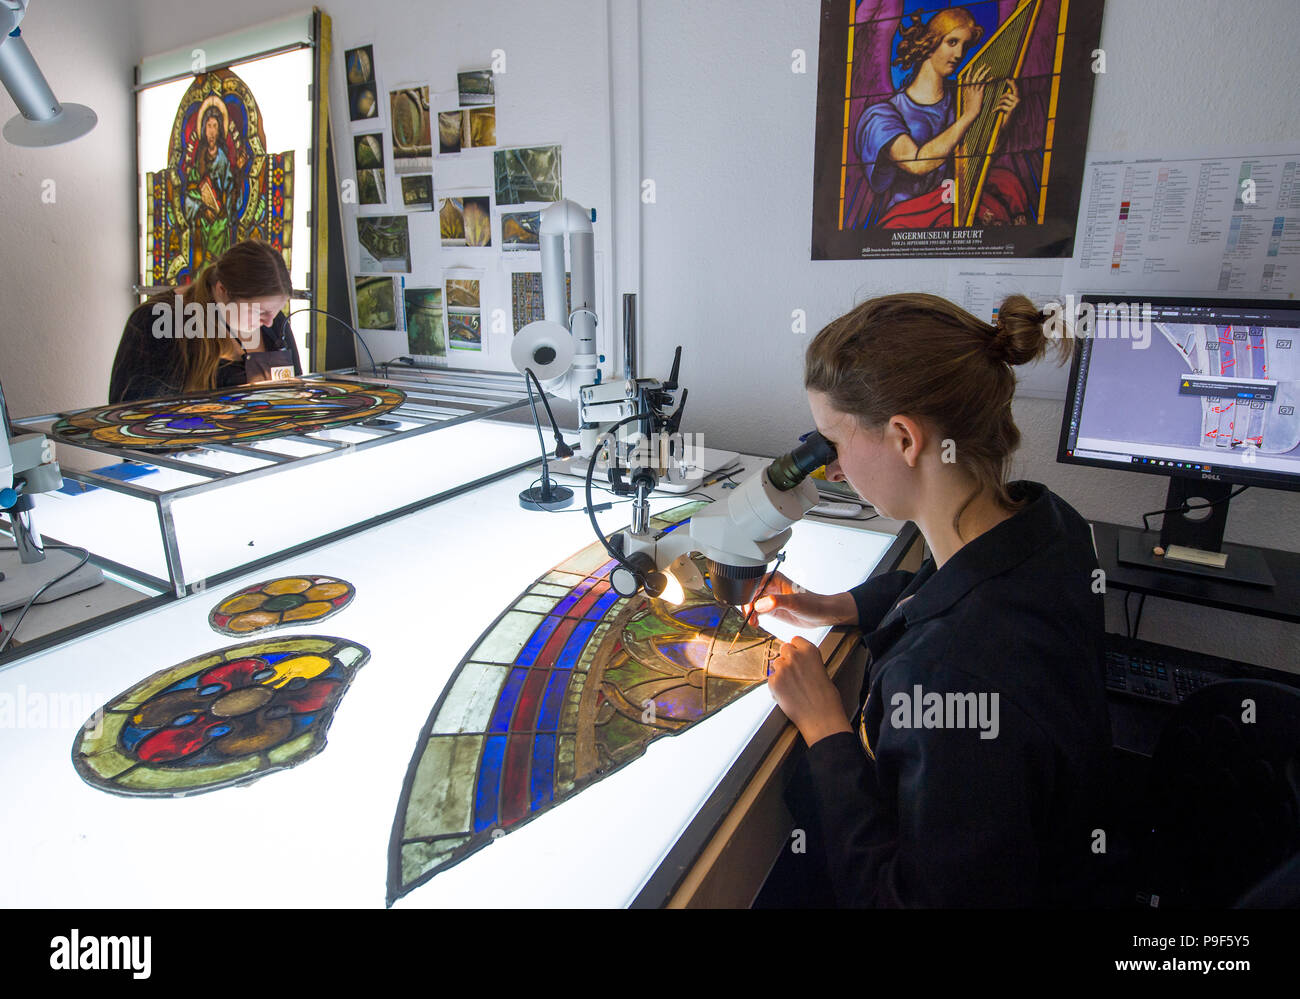 28 July 2018, Naumburg, Germany: Caroline Vogel, intern of the University of York and Jana Hildebrandt (L), conservator work at the glass-conservation studios of the Naumburg cathedral. The windows are part of the precious artifacts from the mid-13th century owned by the church. The windows have been restored and secured preventively by experts since December. The beginning of October will see the finishing touches on the first window, as well as its placement into the window frames. The Naumburg cathedral boasts countless glassworks unlike any other from the 13th, 14th and 15th century. Photo Stock Photo